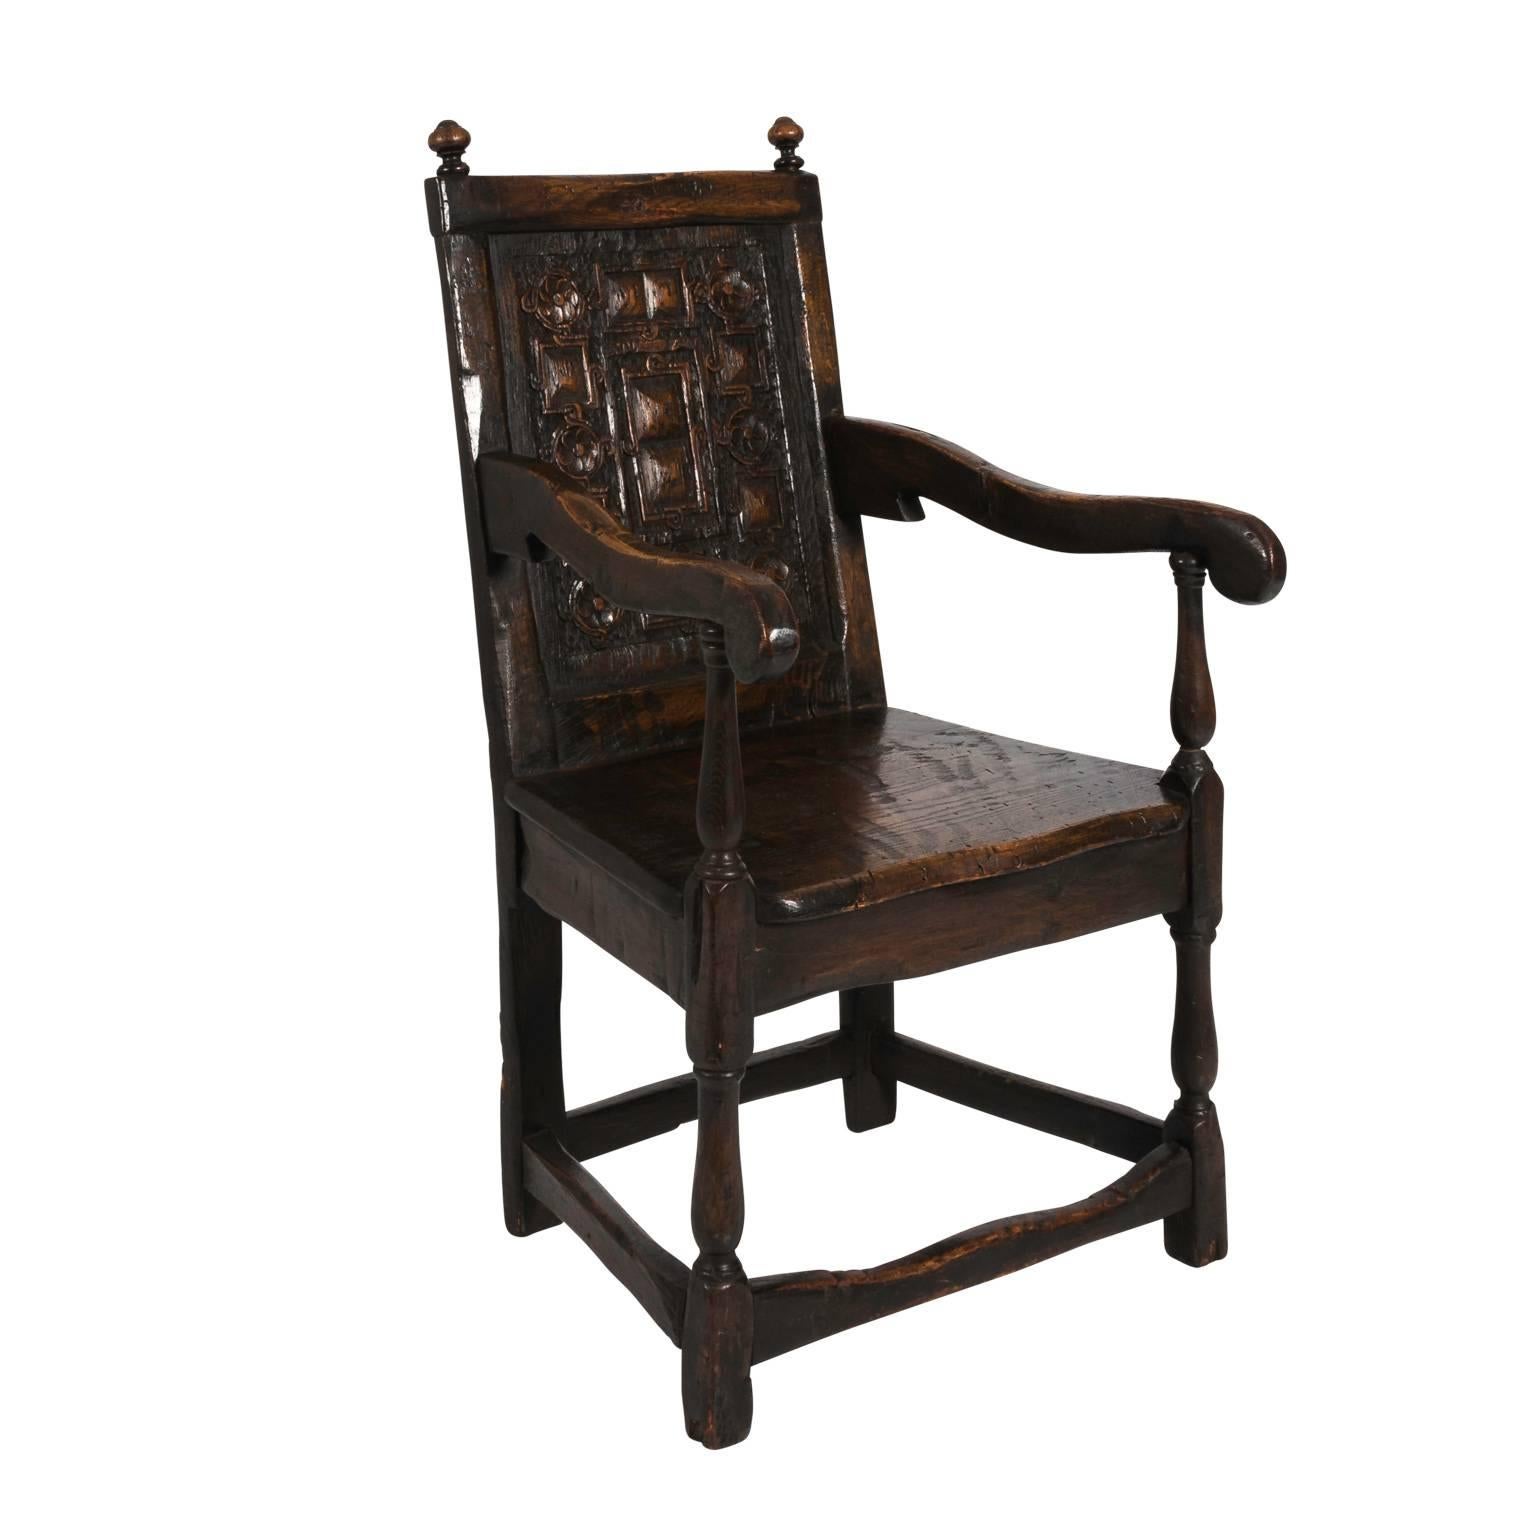 English Oak Jacobean style arm chair with heavy relief carvings on the back and a box stretcher, circa late 19th century.
 